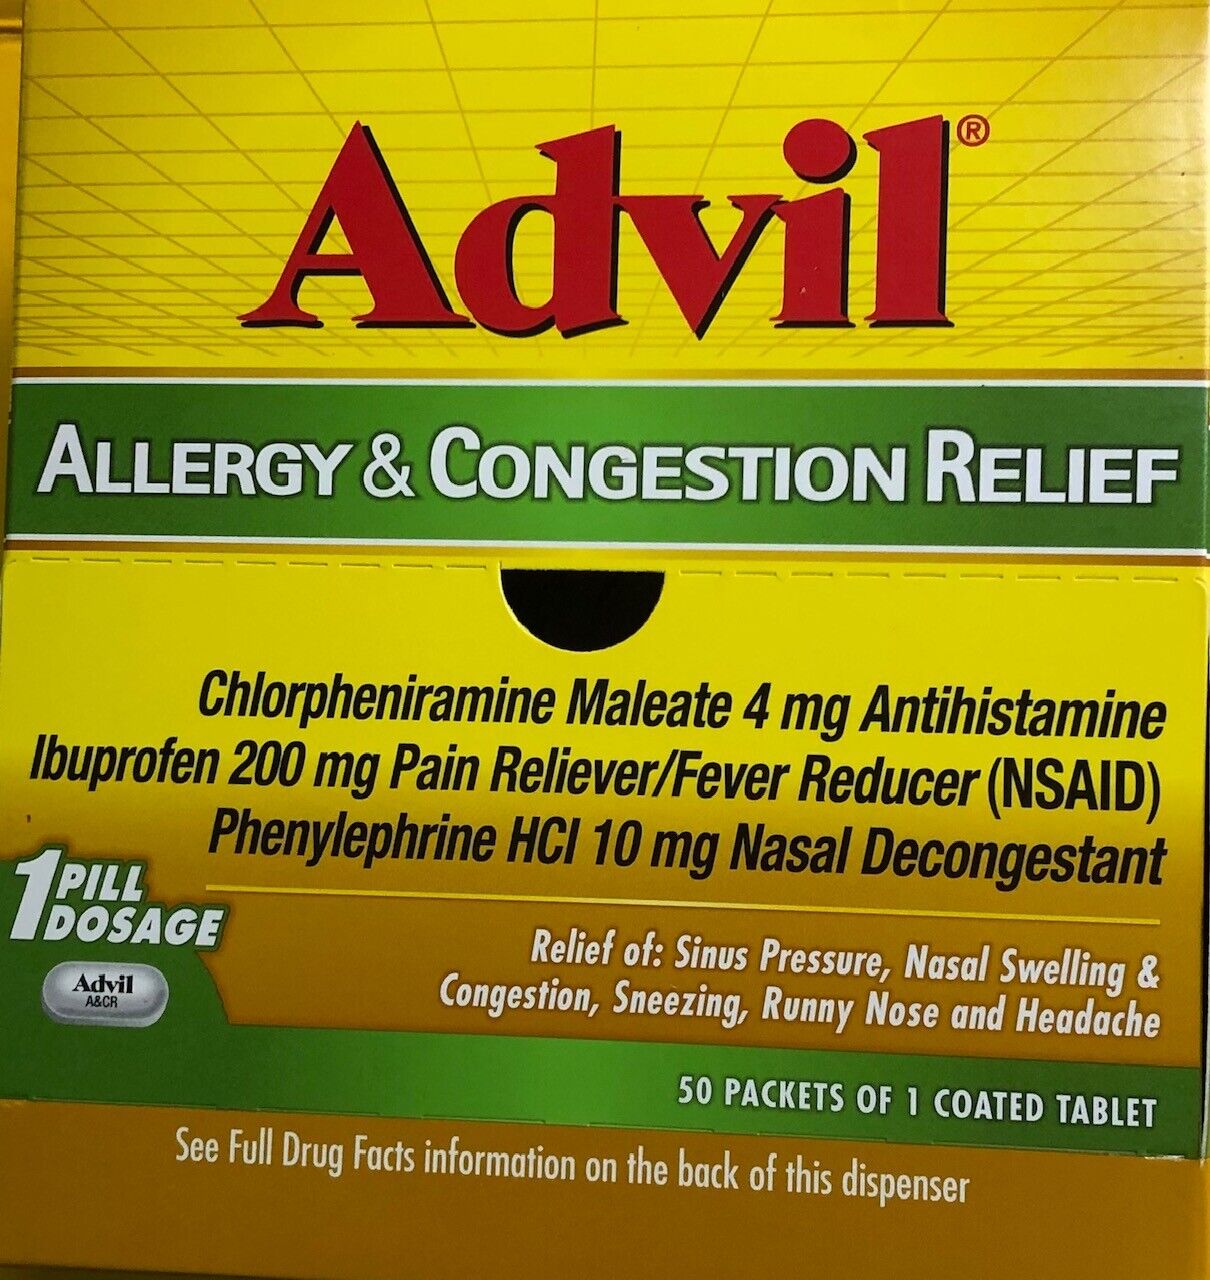  Advil Allergy & Congestion Relief 50 pack / 1 Coated Tablets  Exp:1/2022